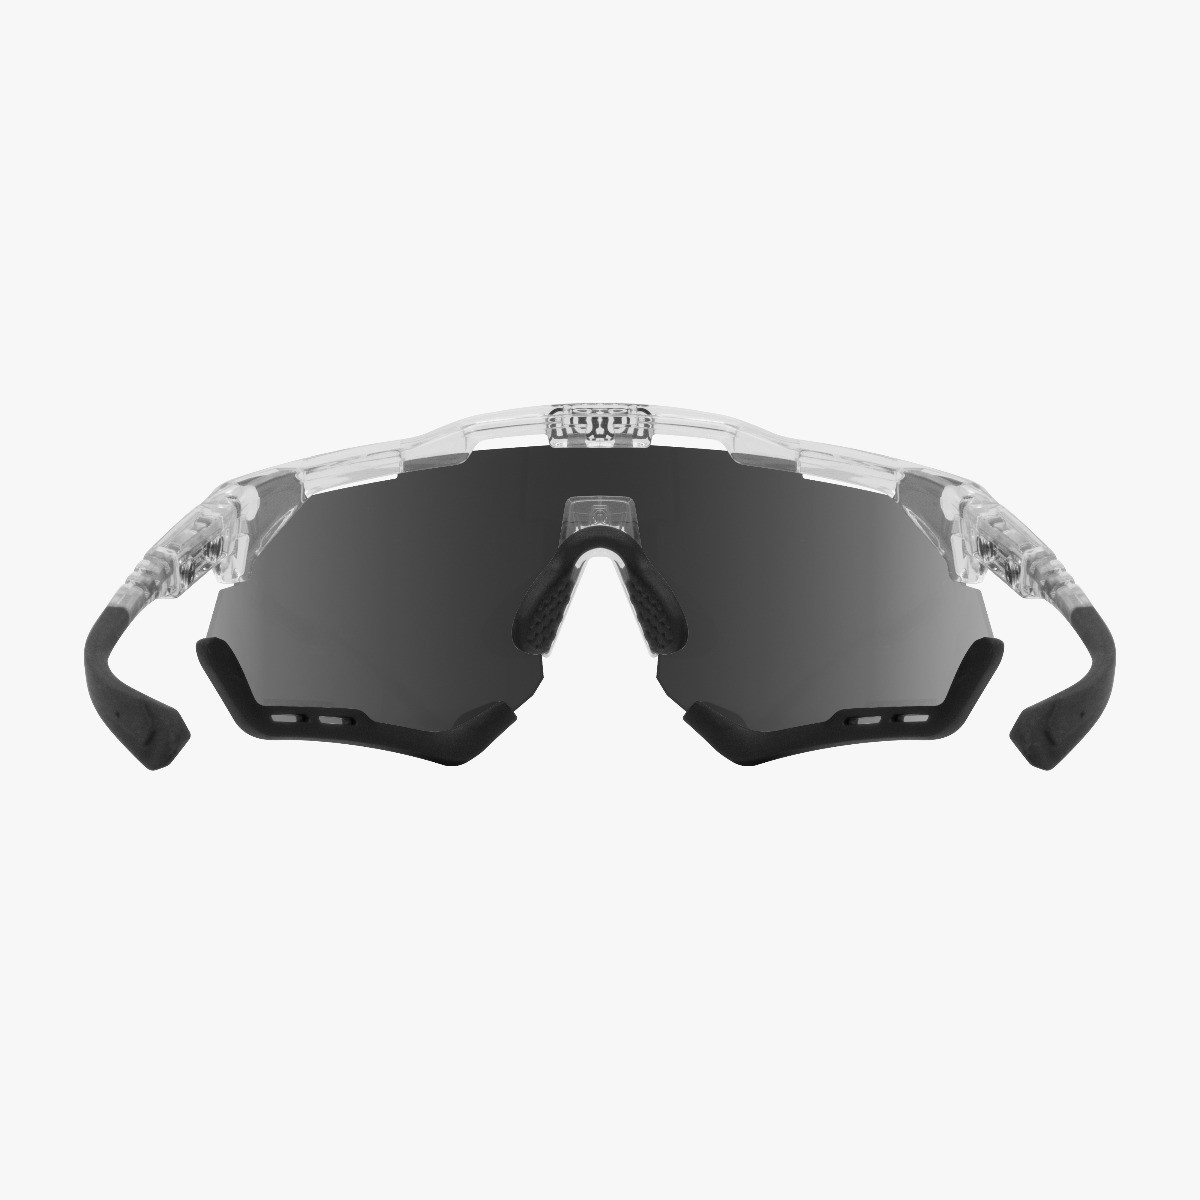 Scicon Sports | Aeroshade XL Cycling Sunglasses - Crystal Gloss / Multimirror Red - EY25060701